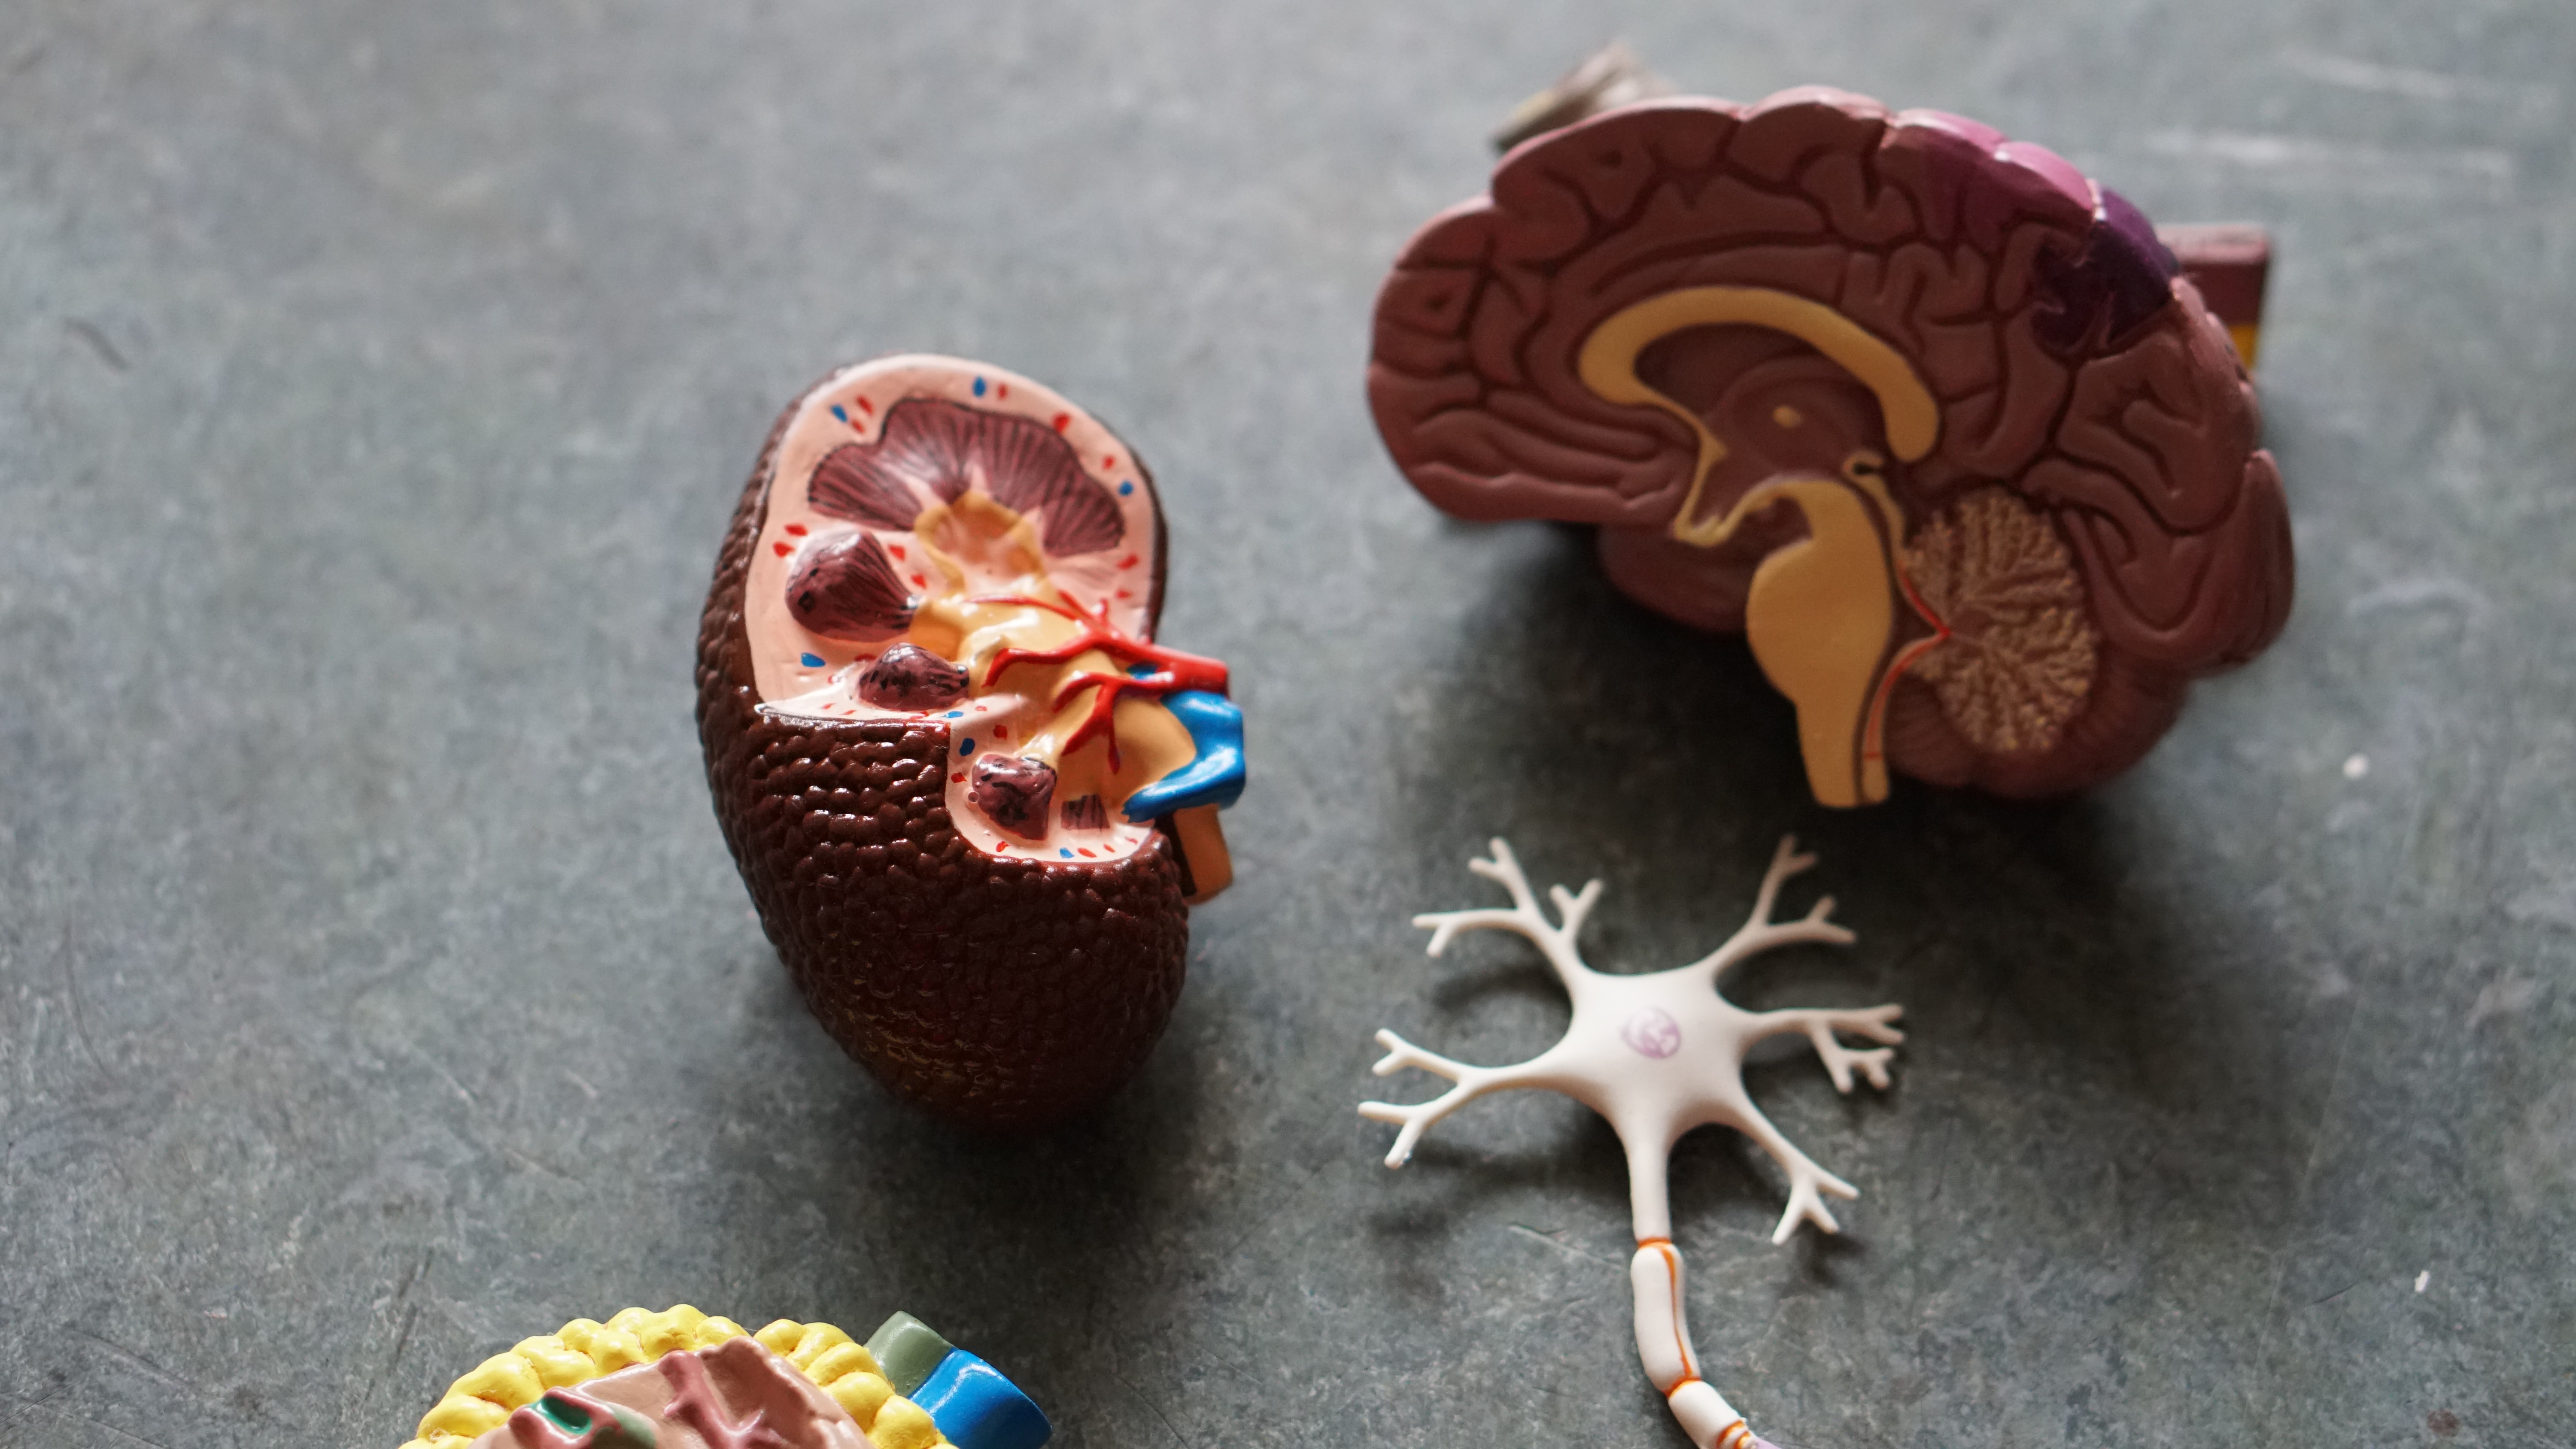 A collection of organ models: kidneys, brain, neurons and more.